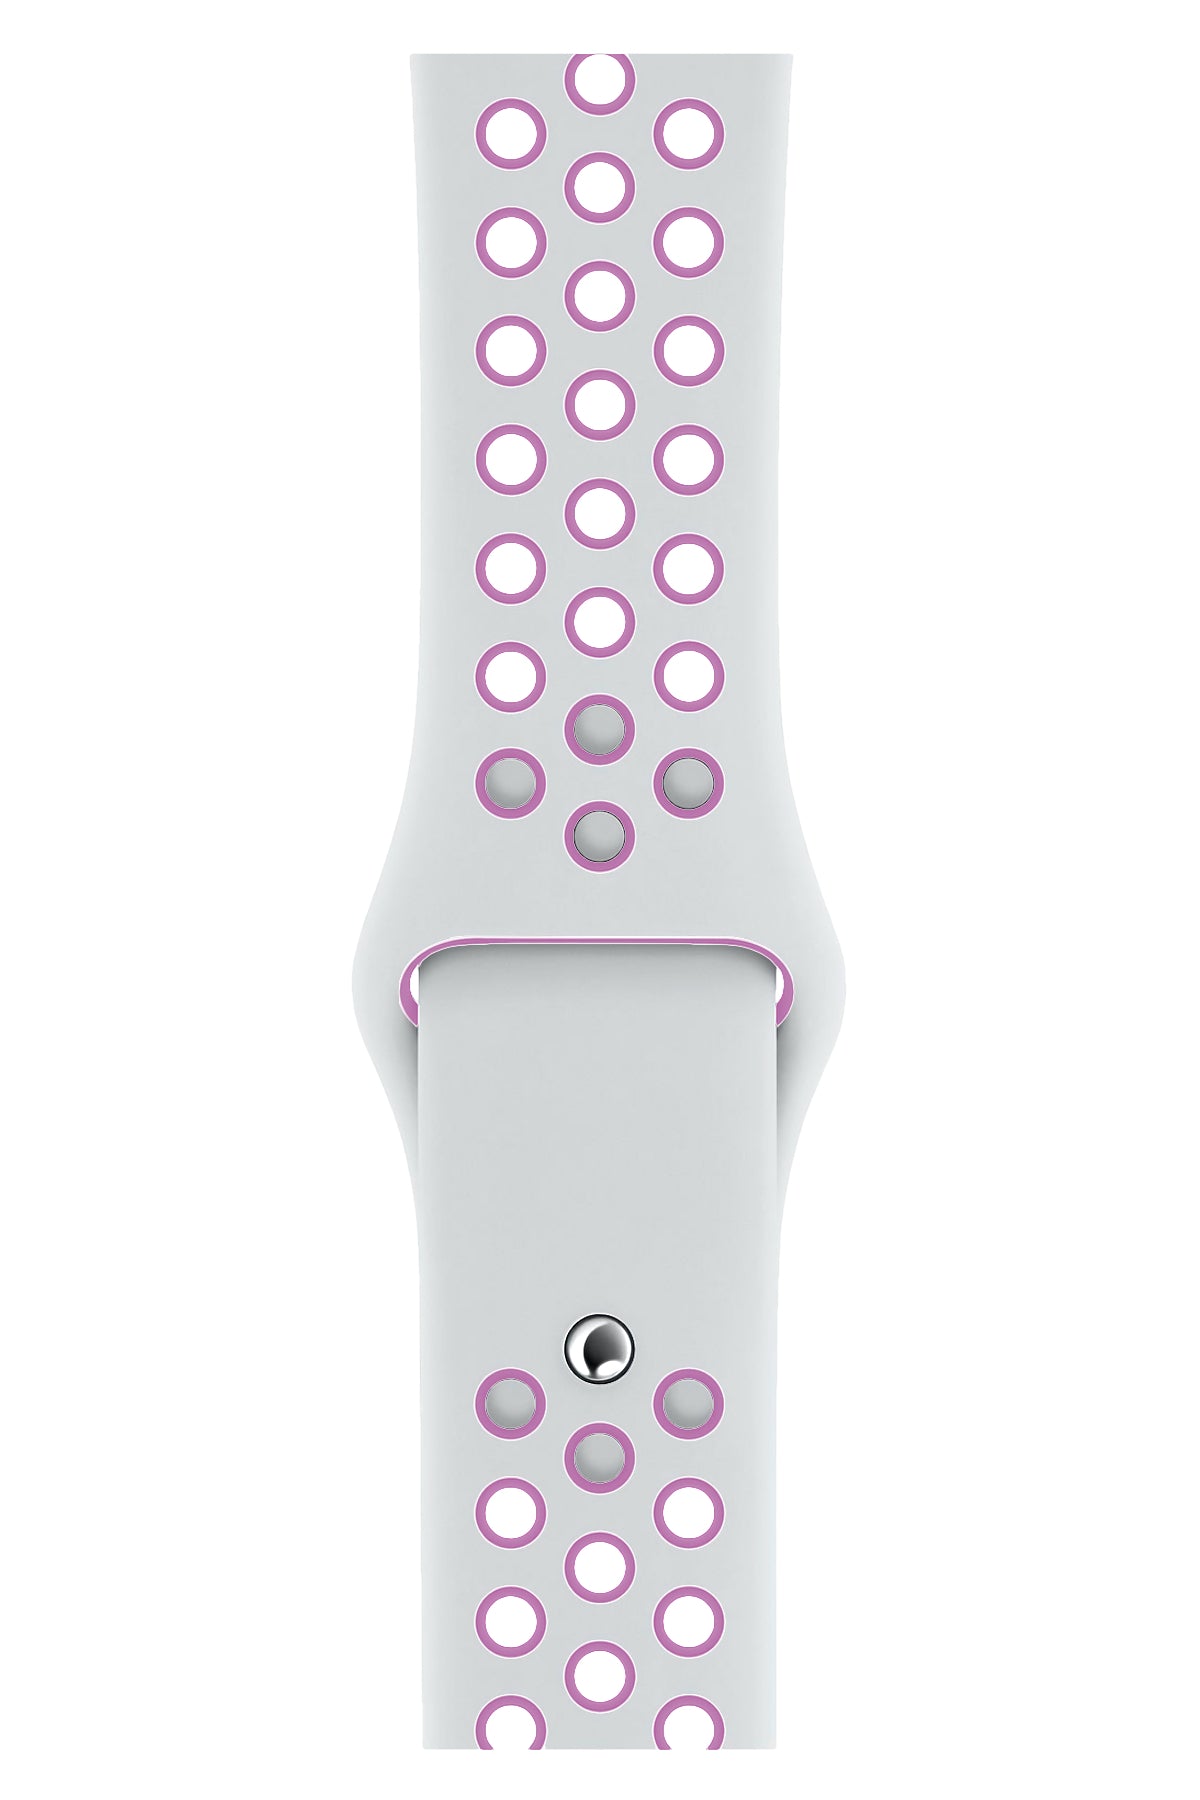 Apple Watch Compatible Silicone Perforated Sport Band White Lilac 